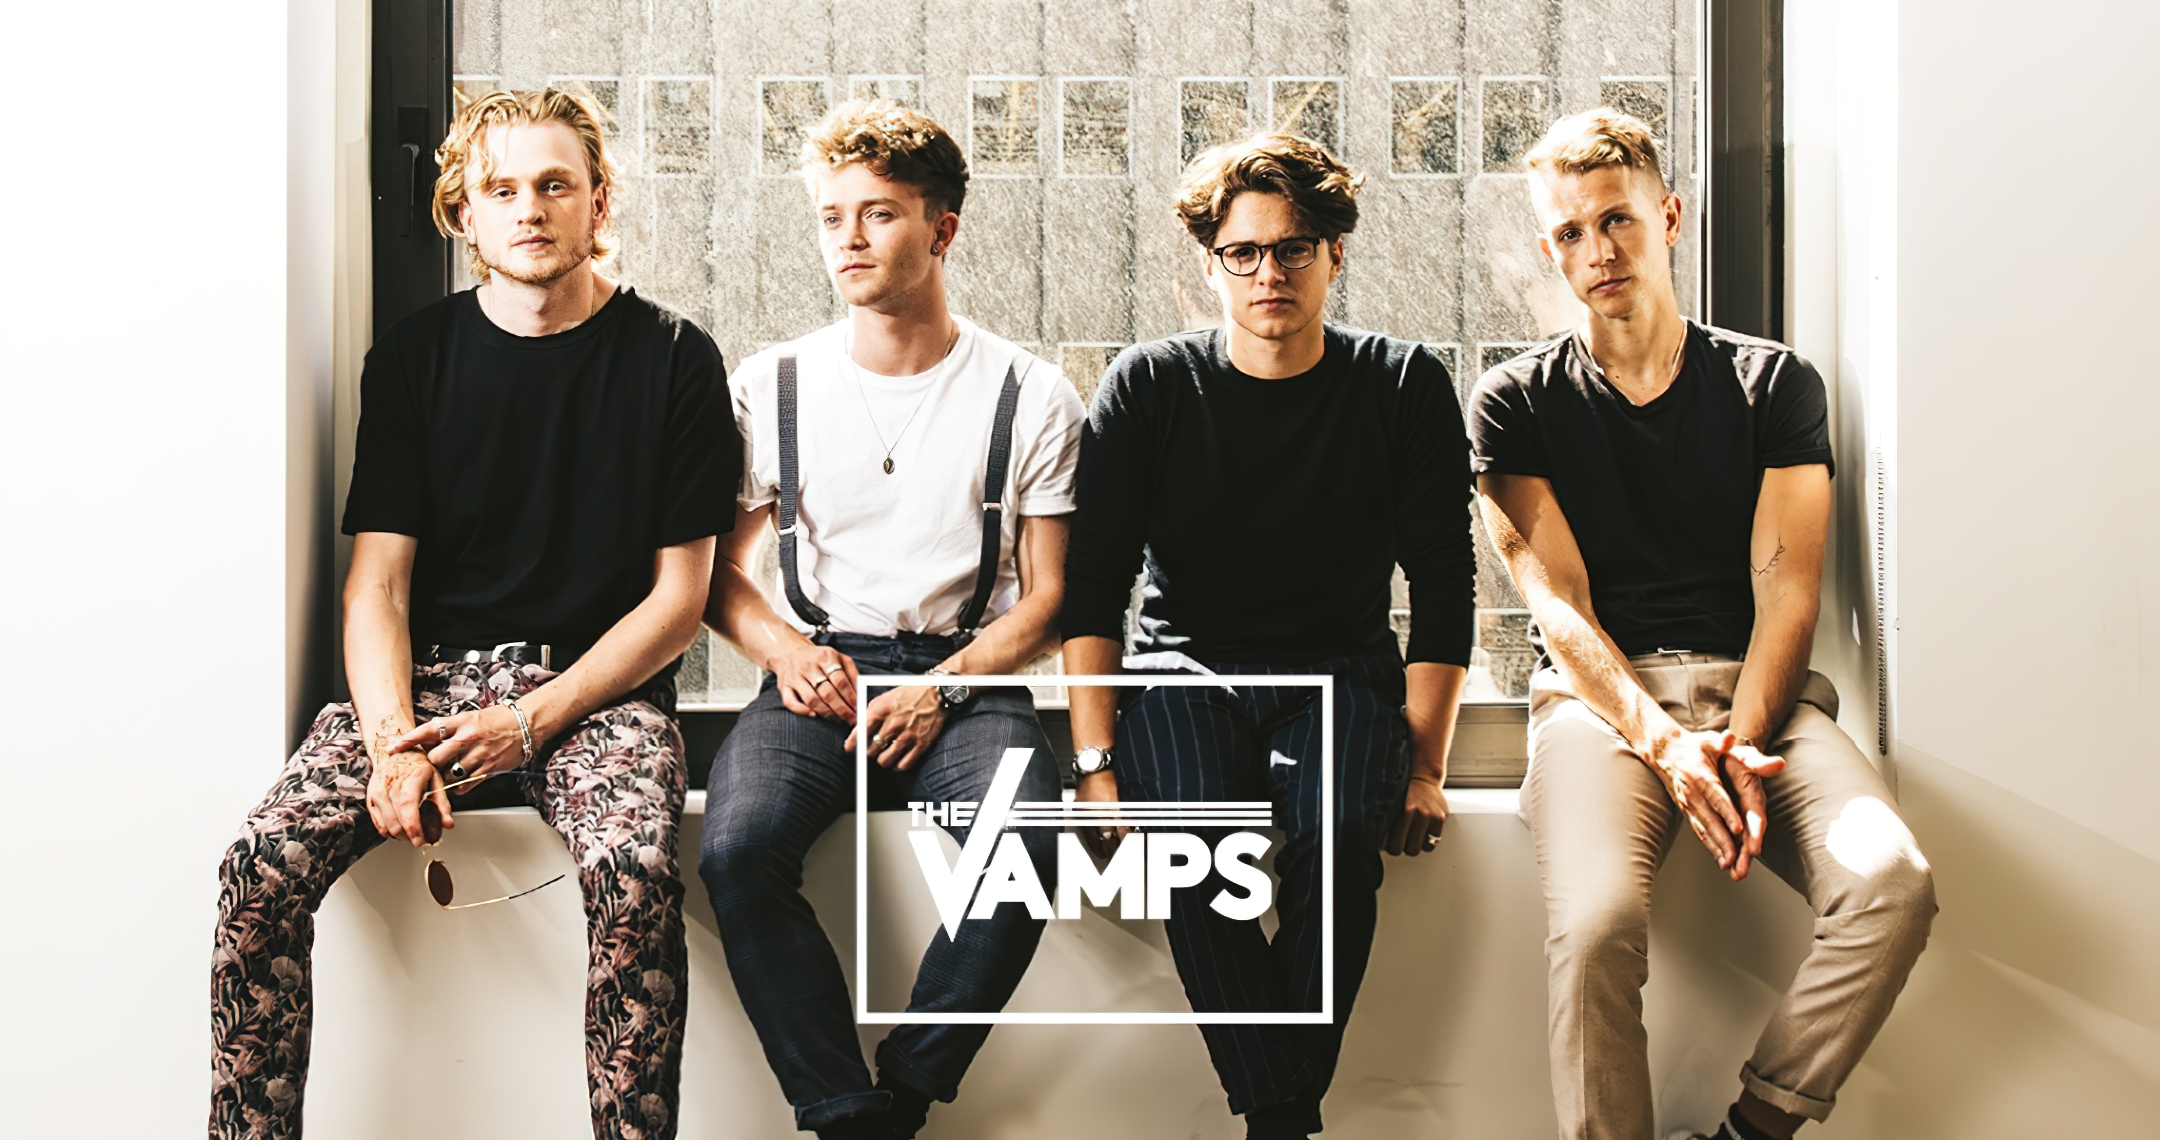 The Vamps Wallpapers